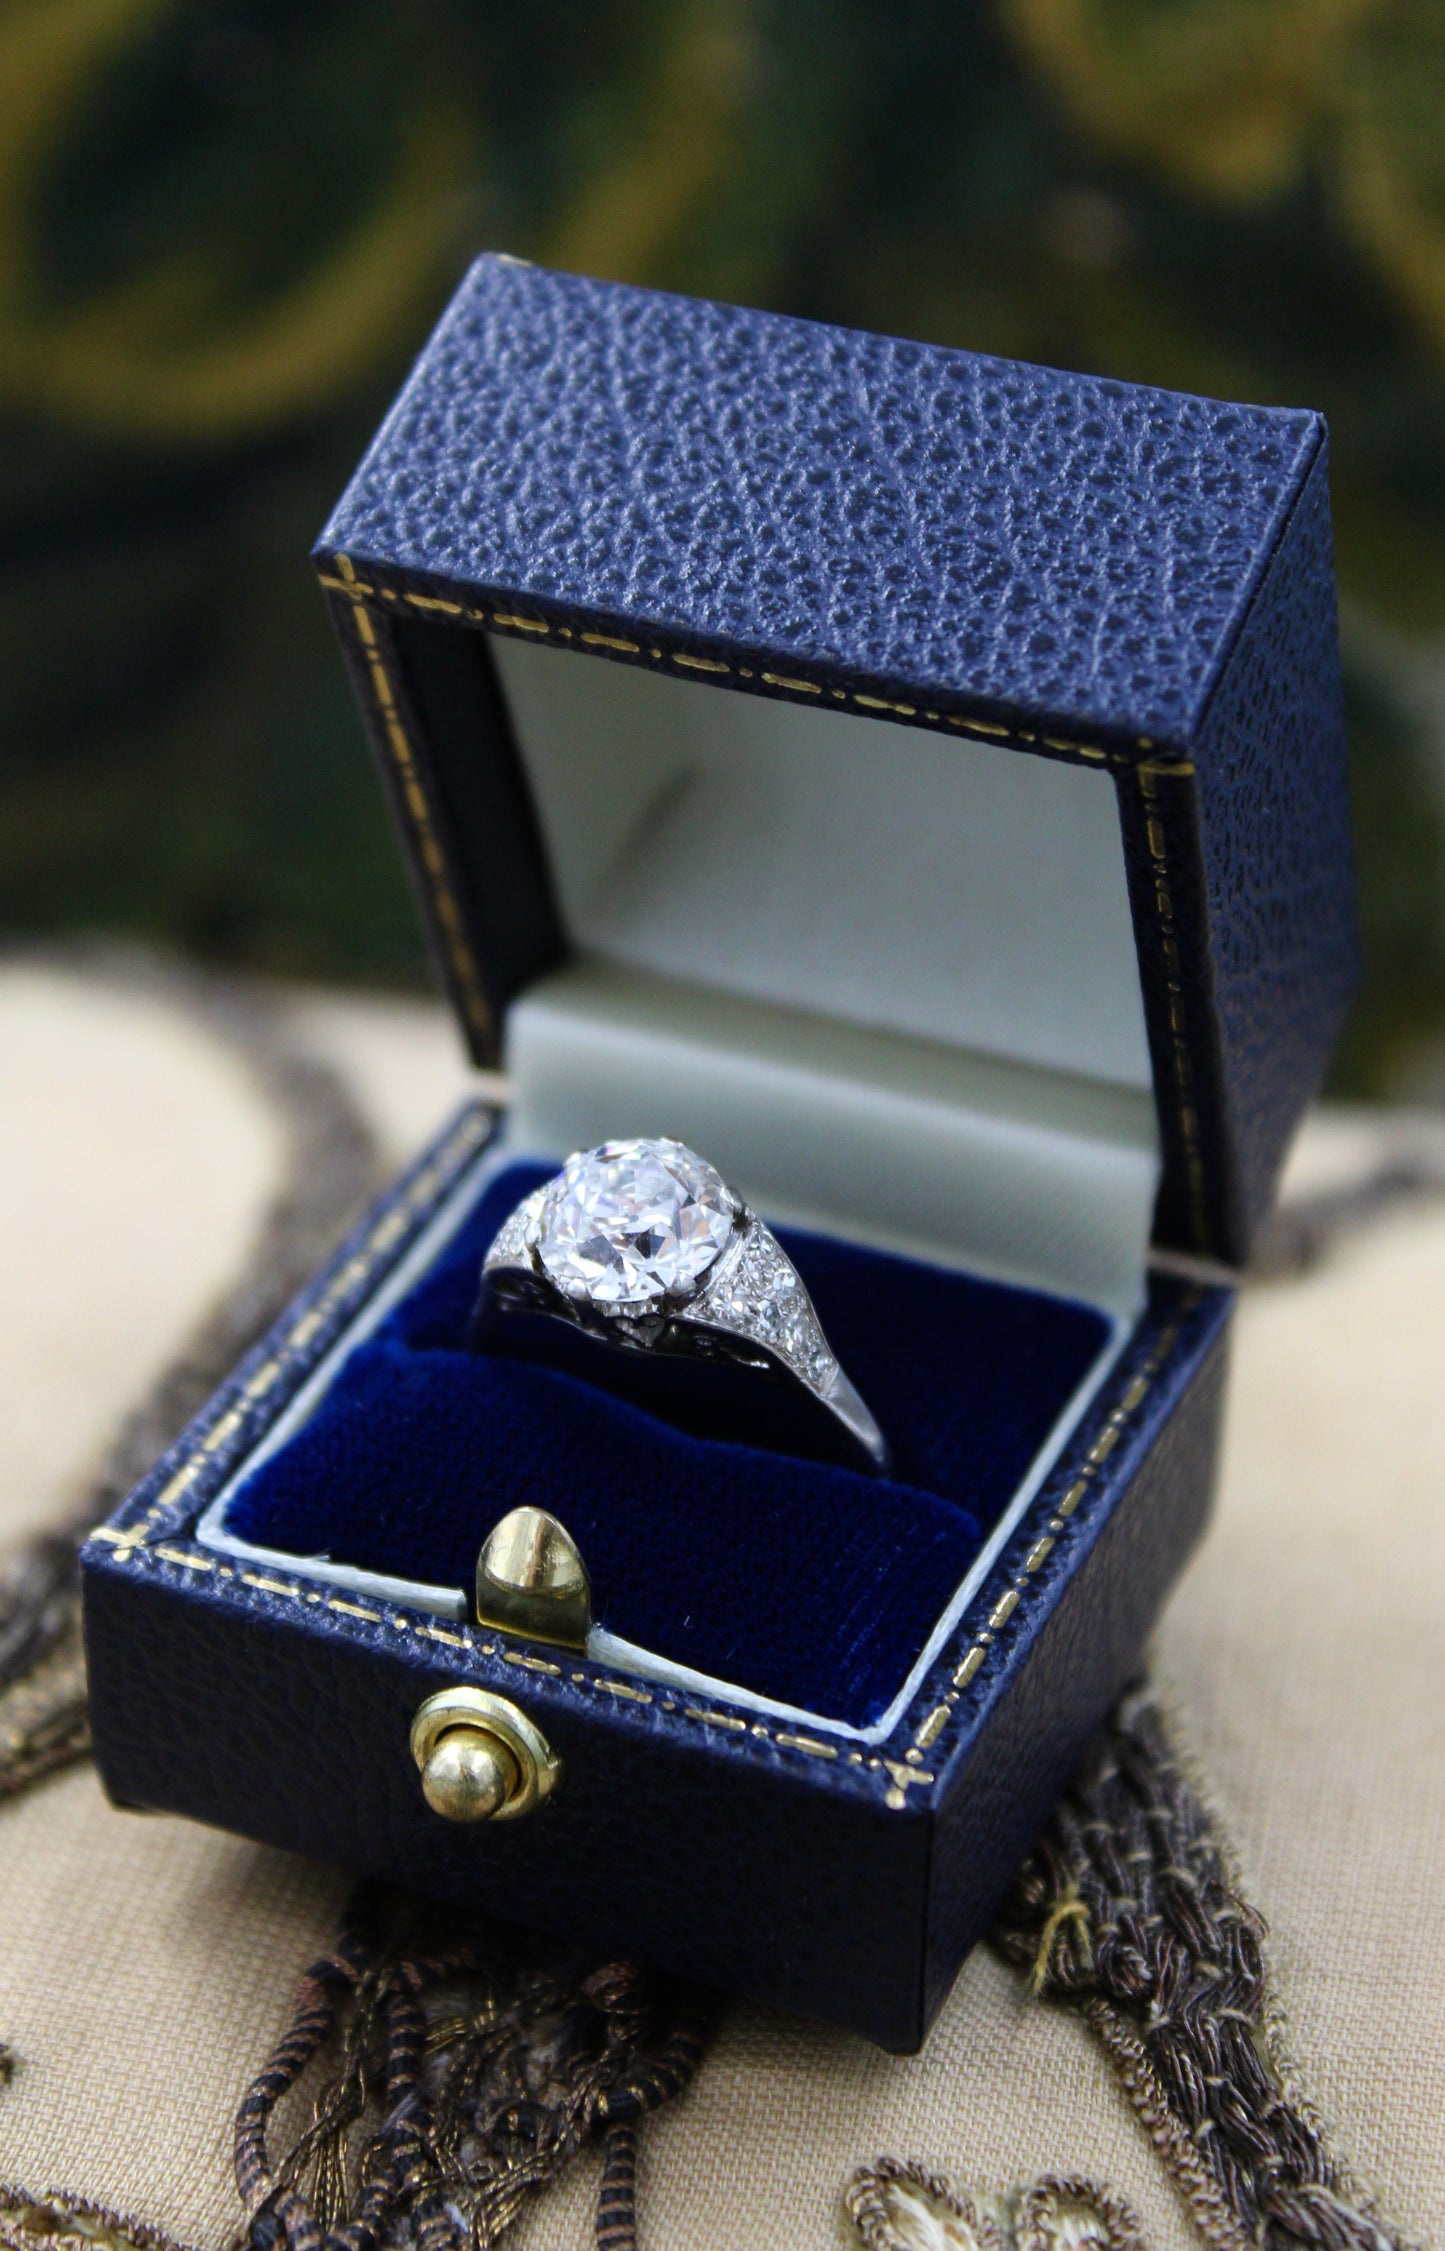 A very fine Platinum & Diamond Solitaire Ring, set with an Old European Cut Diamond, of 2.18 Carats, G Colour and SI1 Clarity. Offset by graduated Diamond Shoulders. Circa 1925 - Robin Haydock Antiques